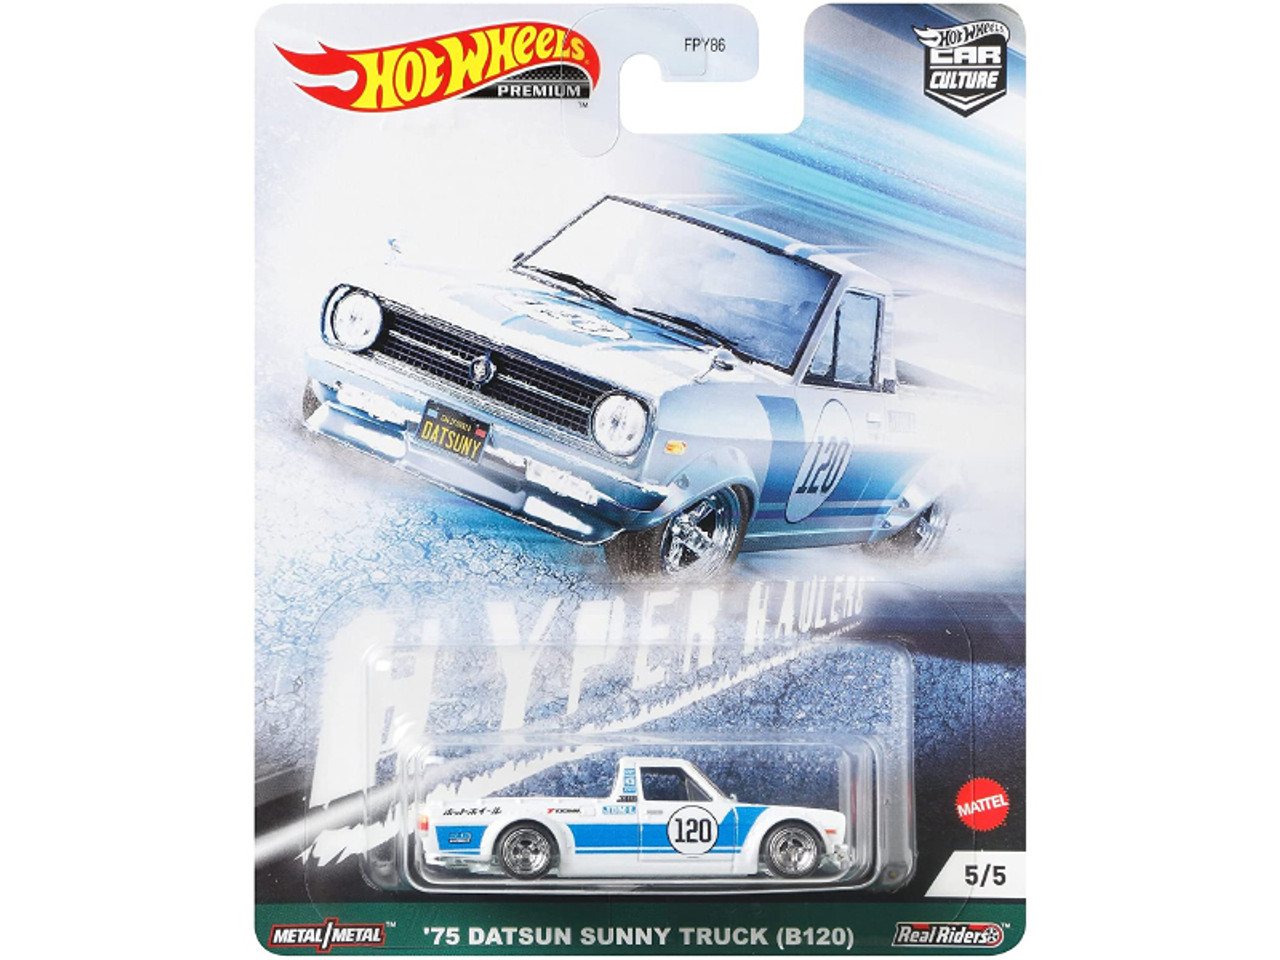 1975 Datsun (B120) Sunny Pickup Truck #120 White with Blue Stripes "Hyper Haulers" Series Diecast Model Car by Hot Wheels